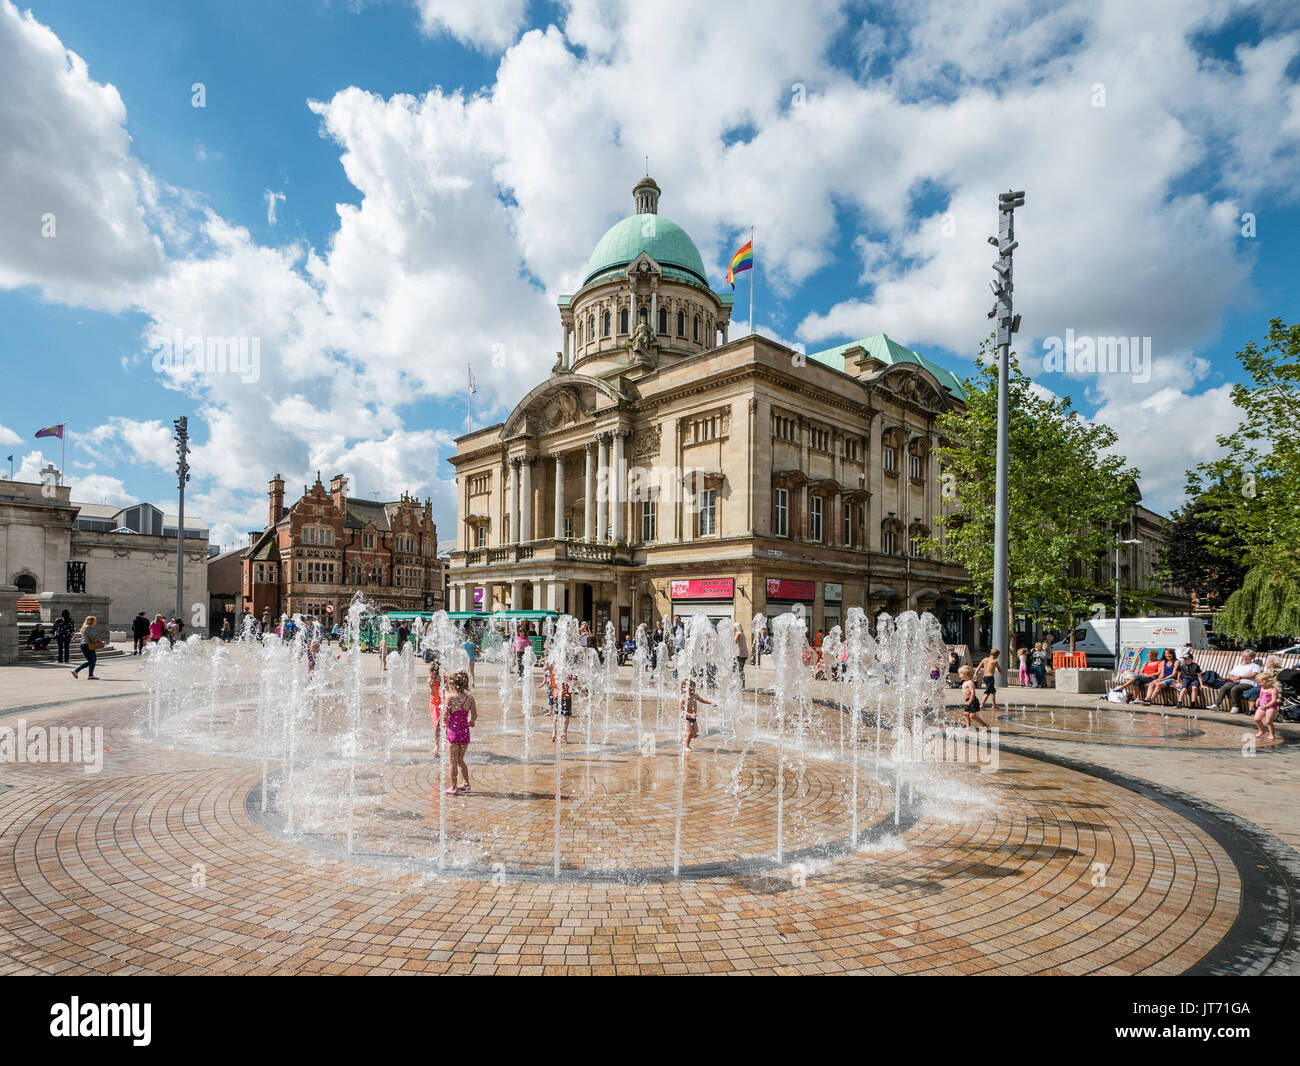 Children playing in Fountain next to the City Hall in Hull Yorkshire UK. Stock Photo